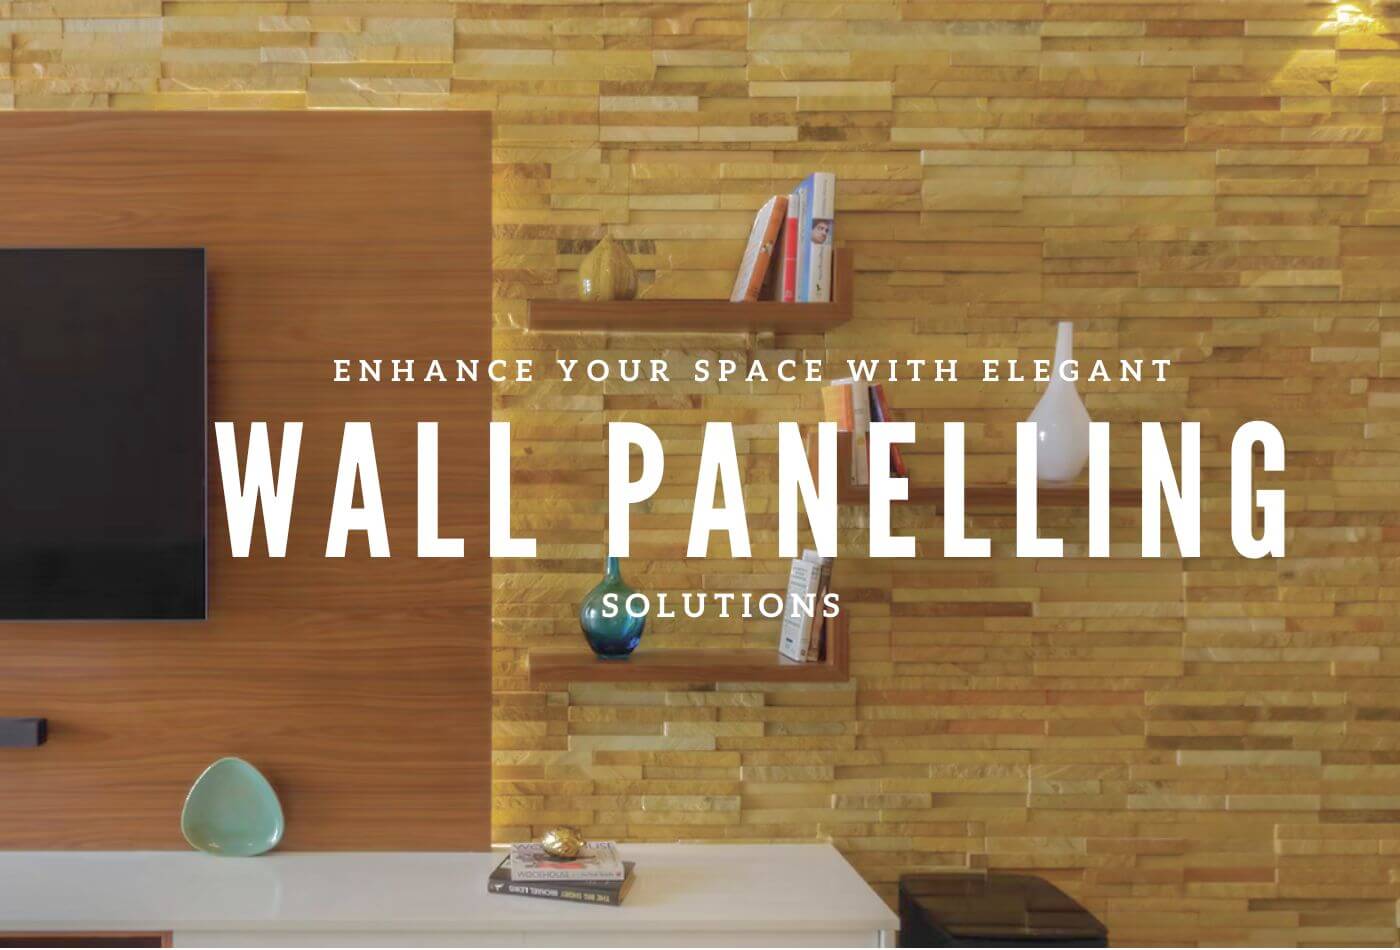 Wall Panelling; Enhance Your Space With Elegant Solutions